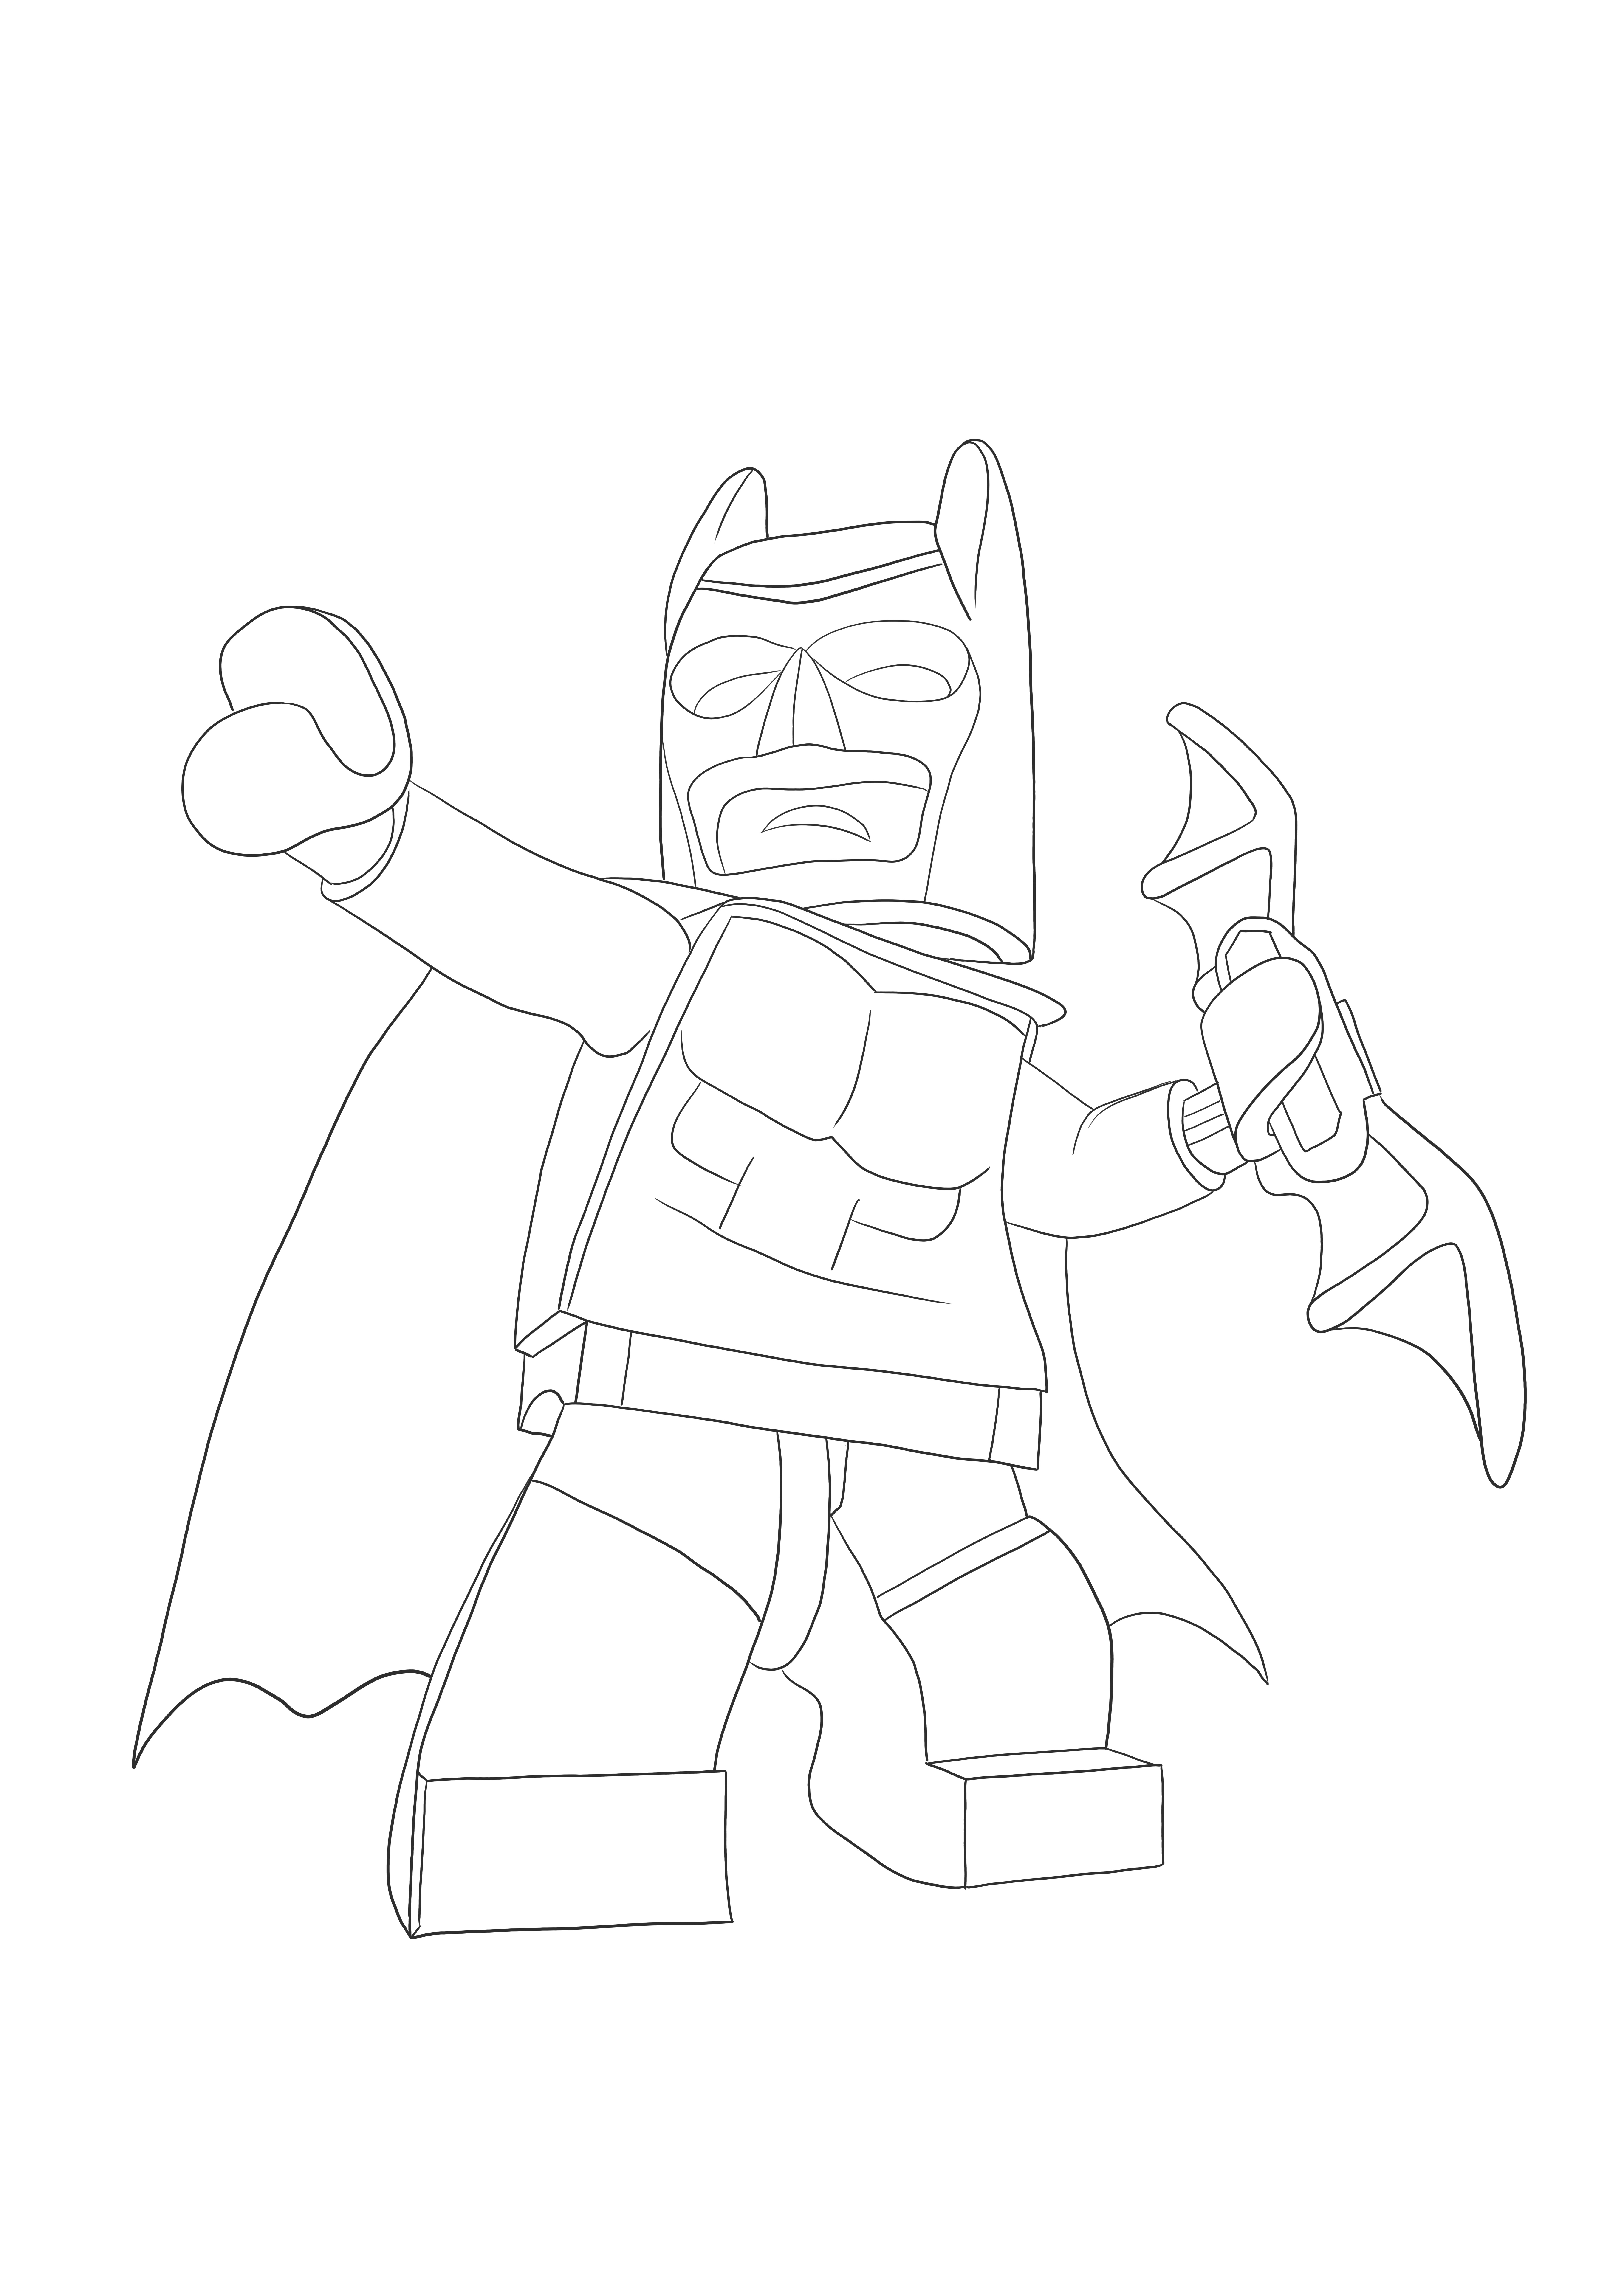 Lego Batman free printable to color with fun for kids